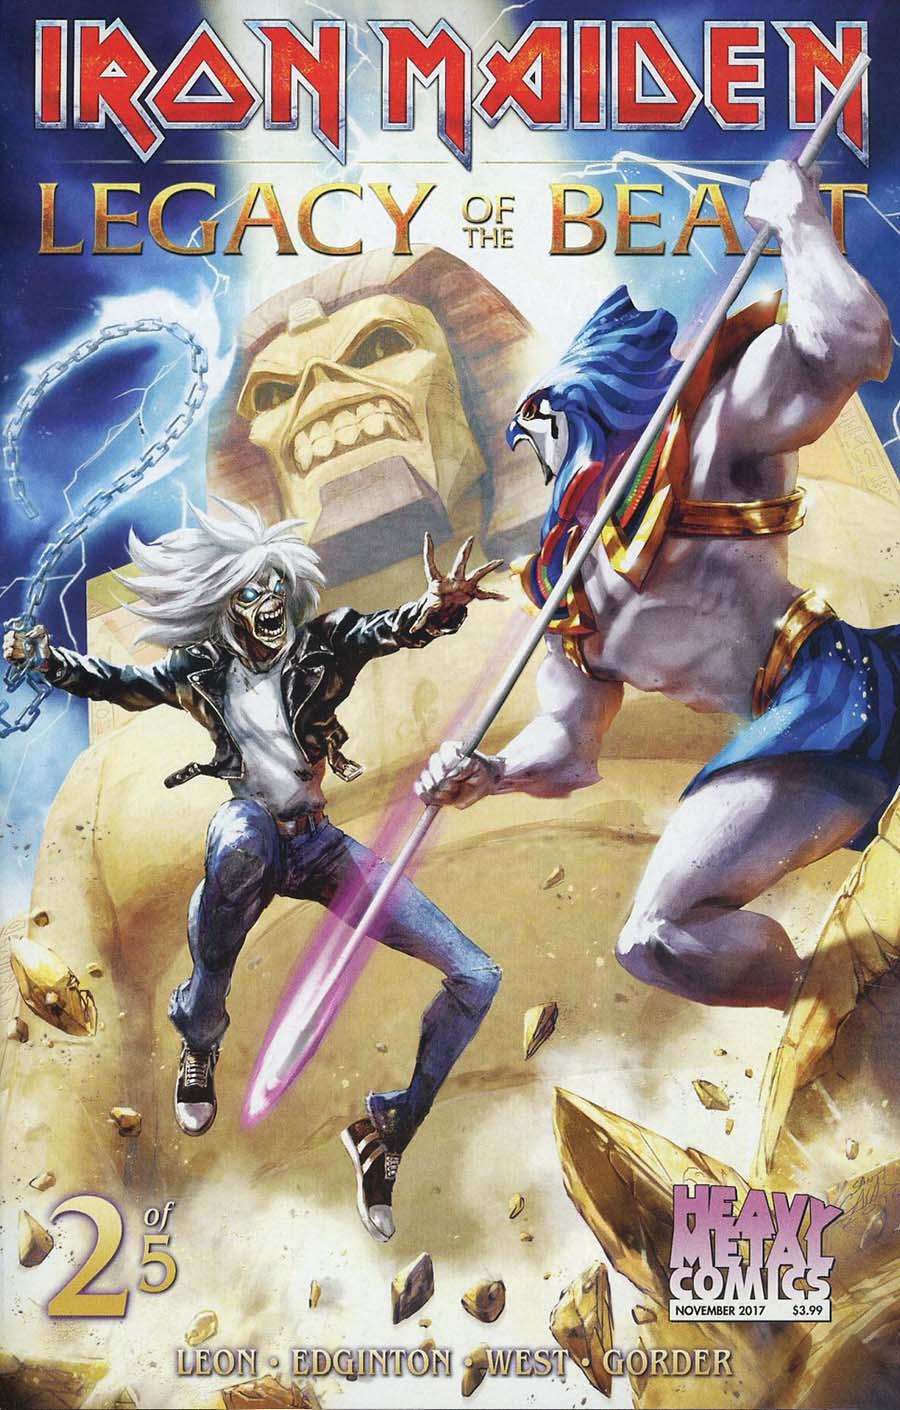 Iron Maiden Legacy Of The Beast Vol. 1 #2